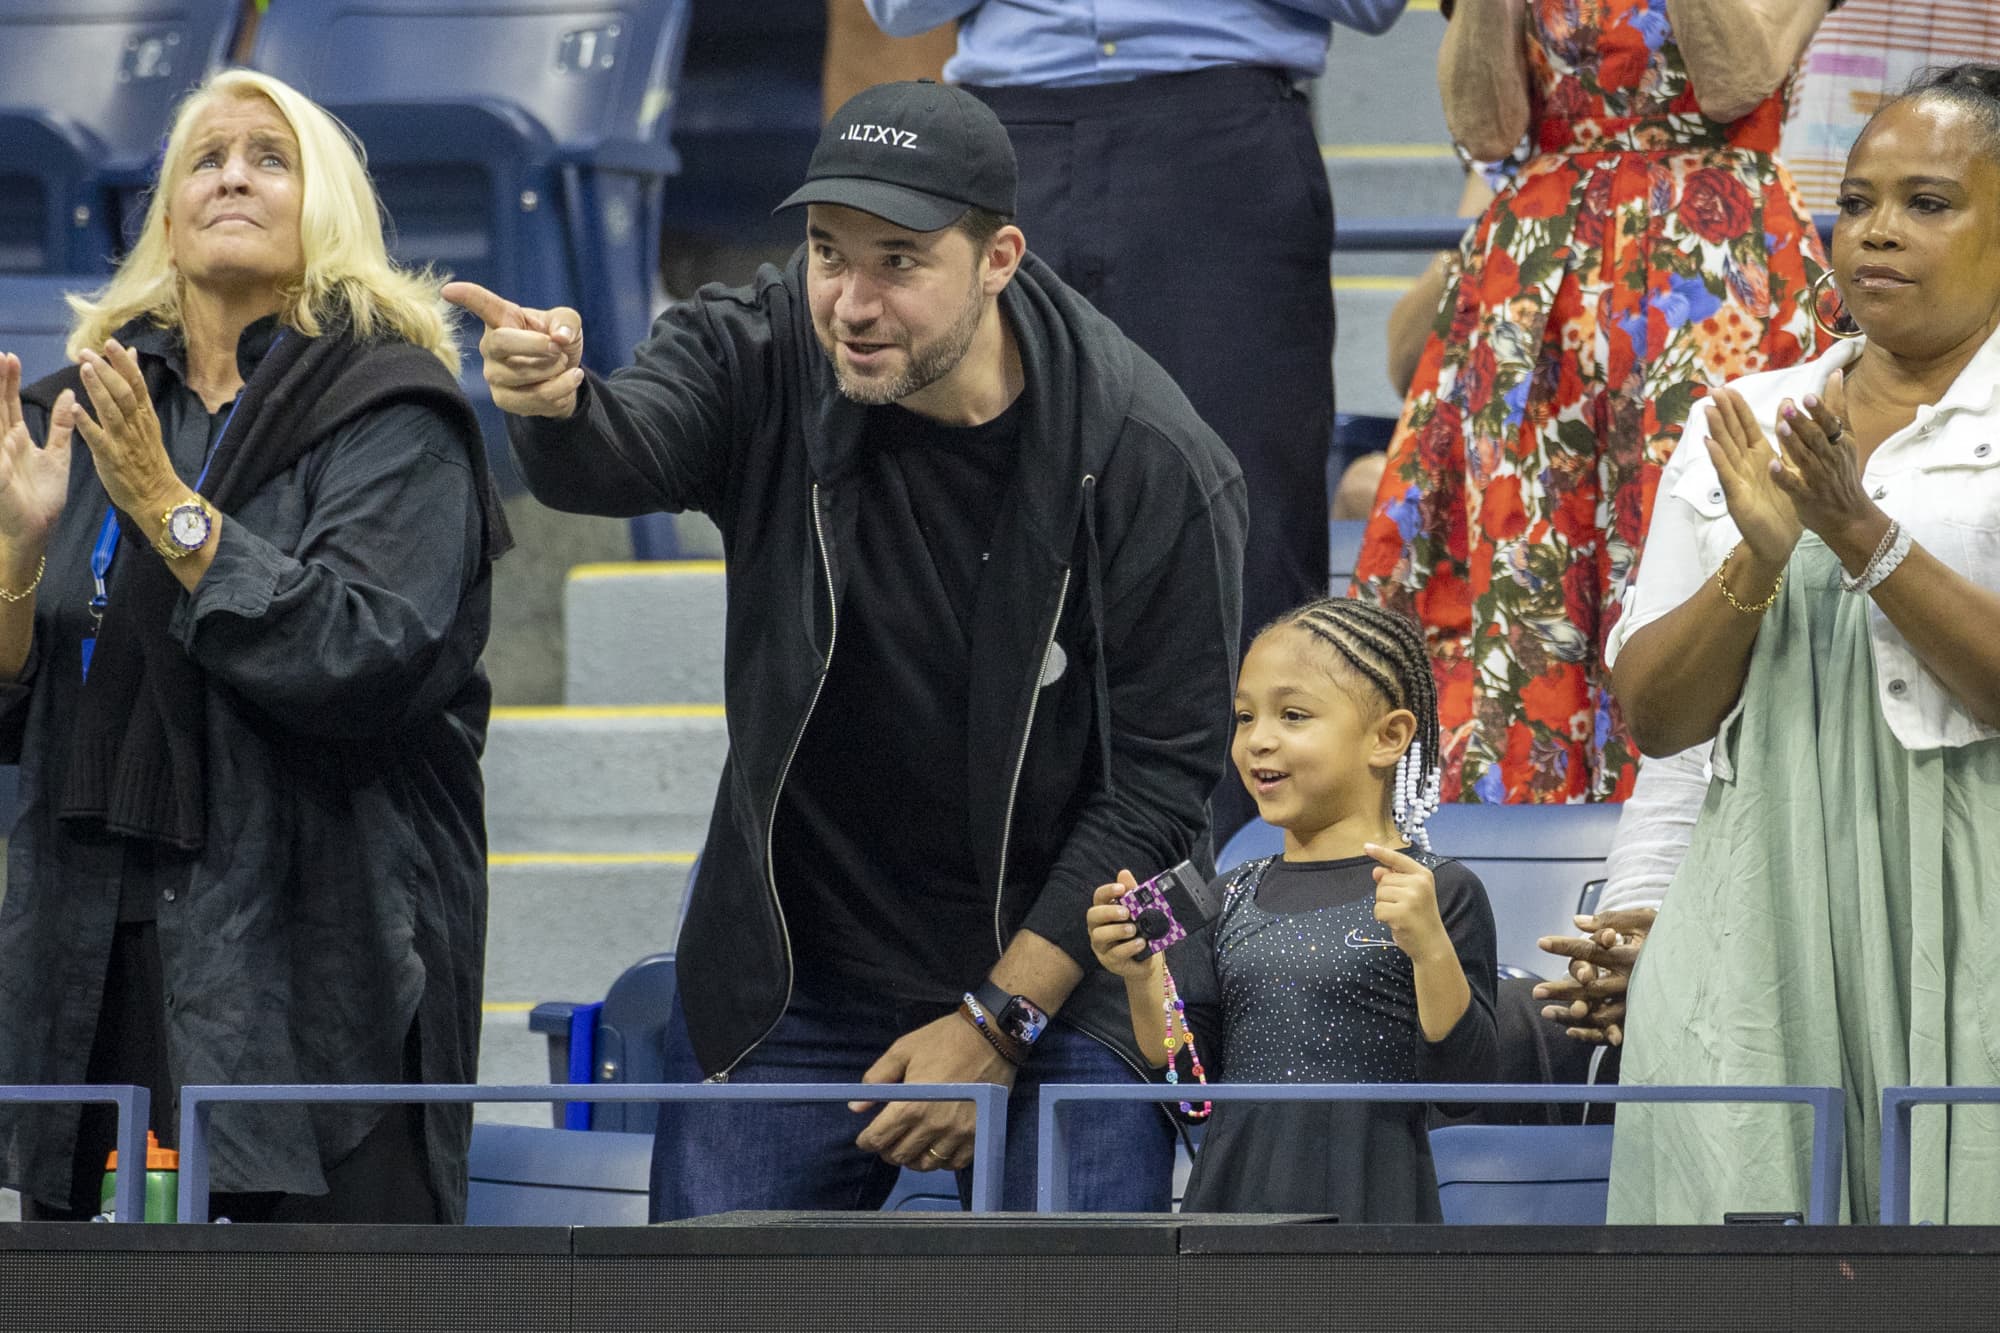 Serena Williams' daughter Alexis Olympia and husband Alexis Ohanian